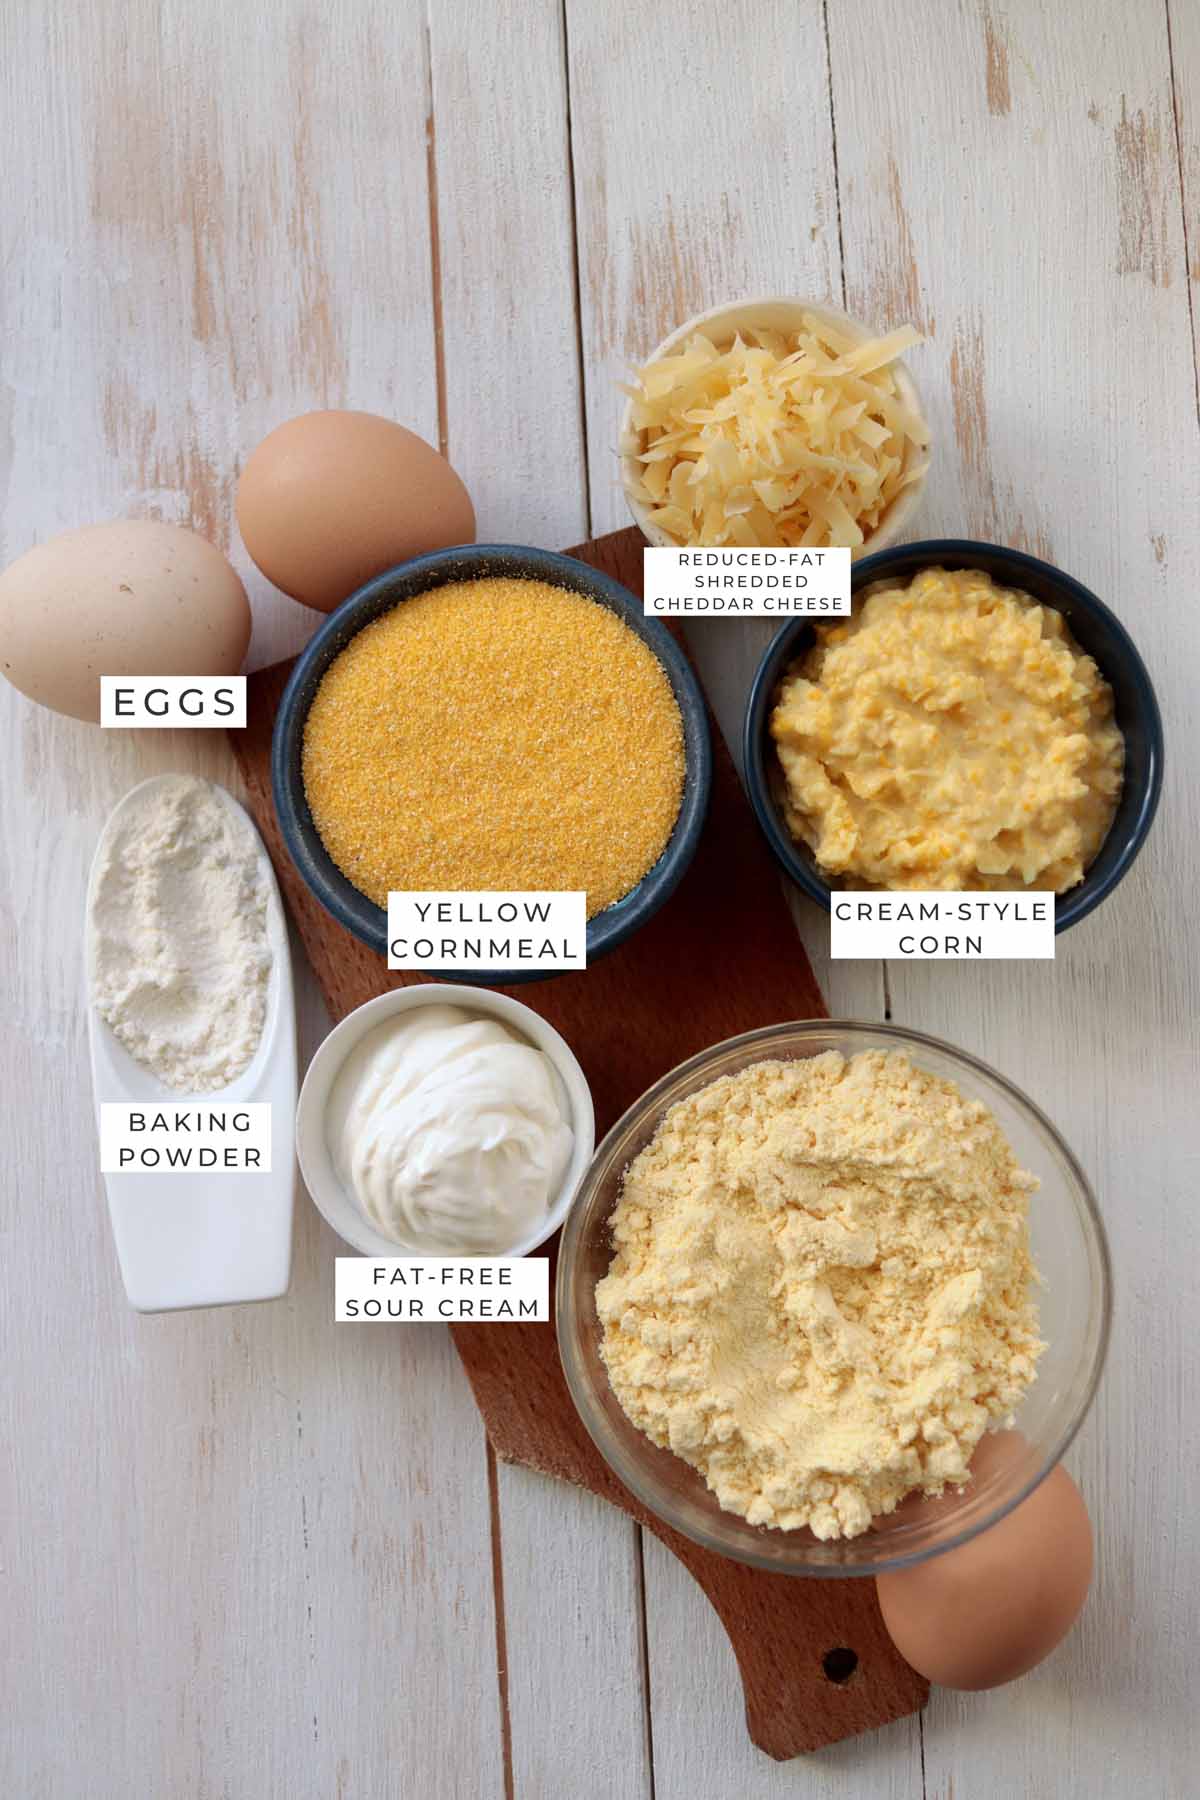 Labeled ingredients for the cornbread.